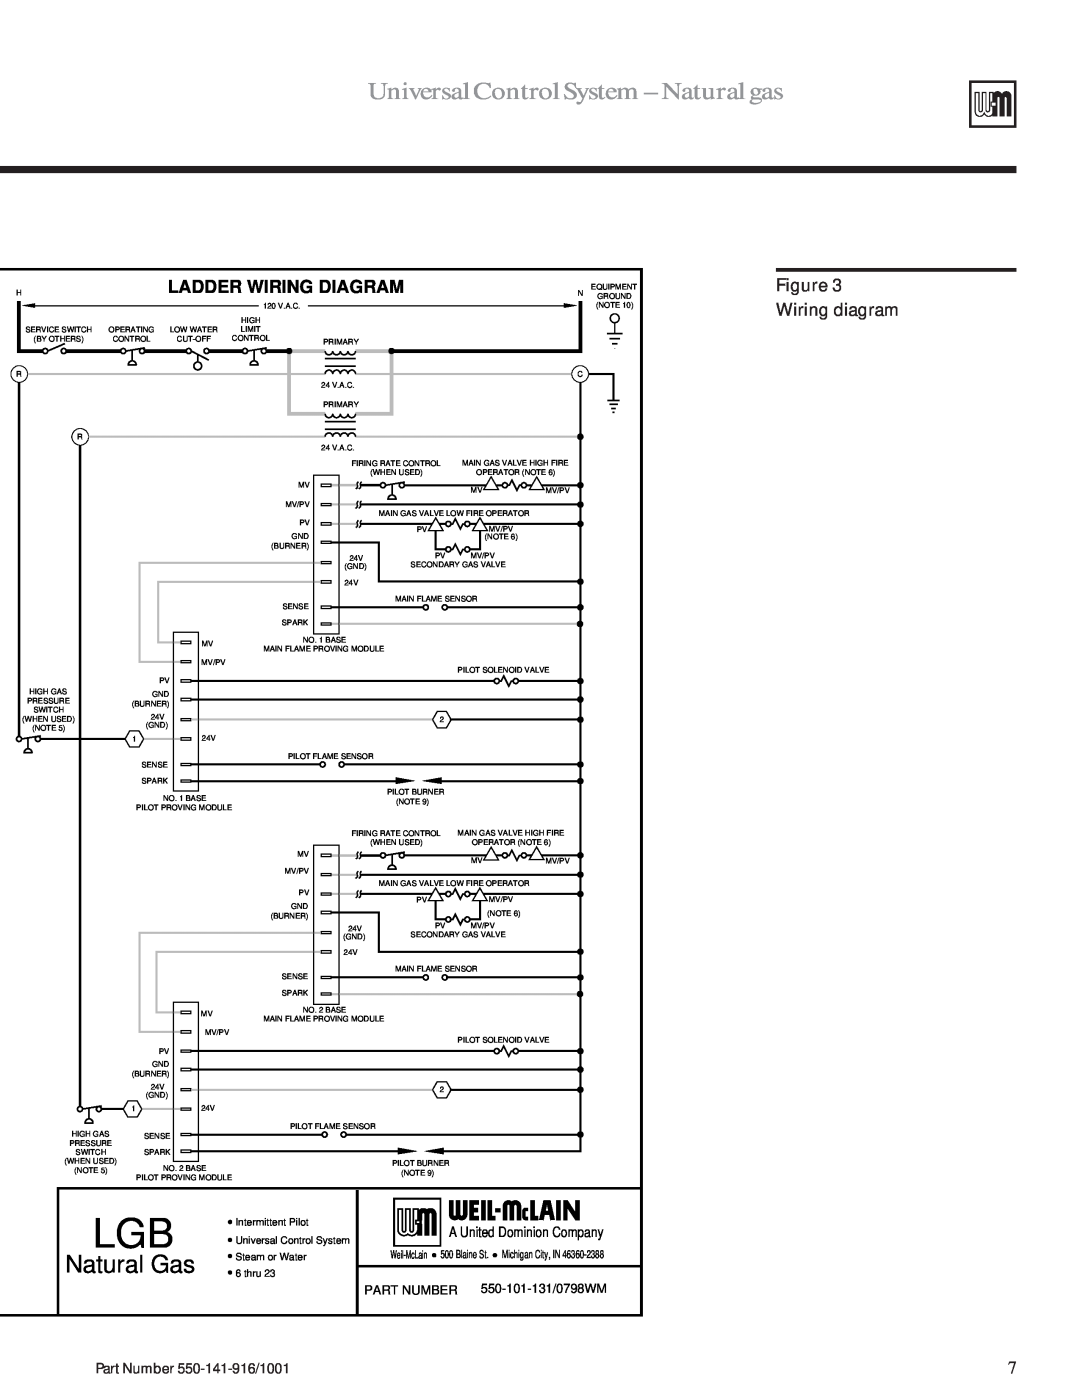 Weil-McLain LGB-23 Wiring diagram, Universal Control System - Natural gas, Natural Gas, Ladder Wiring Diagram, Part Number 